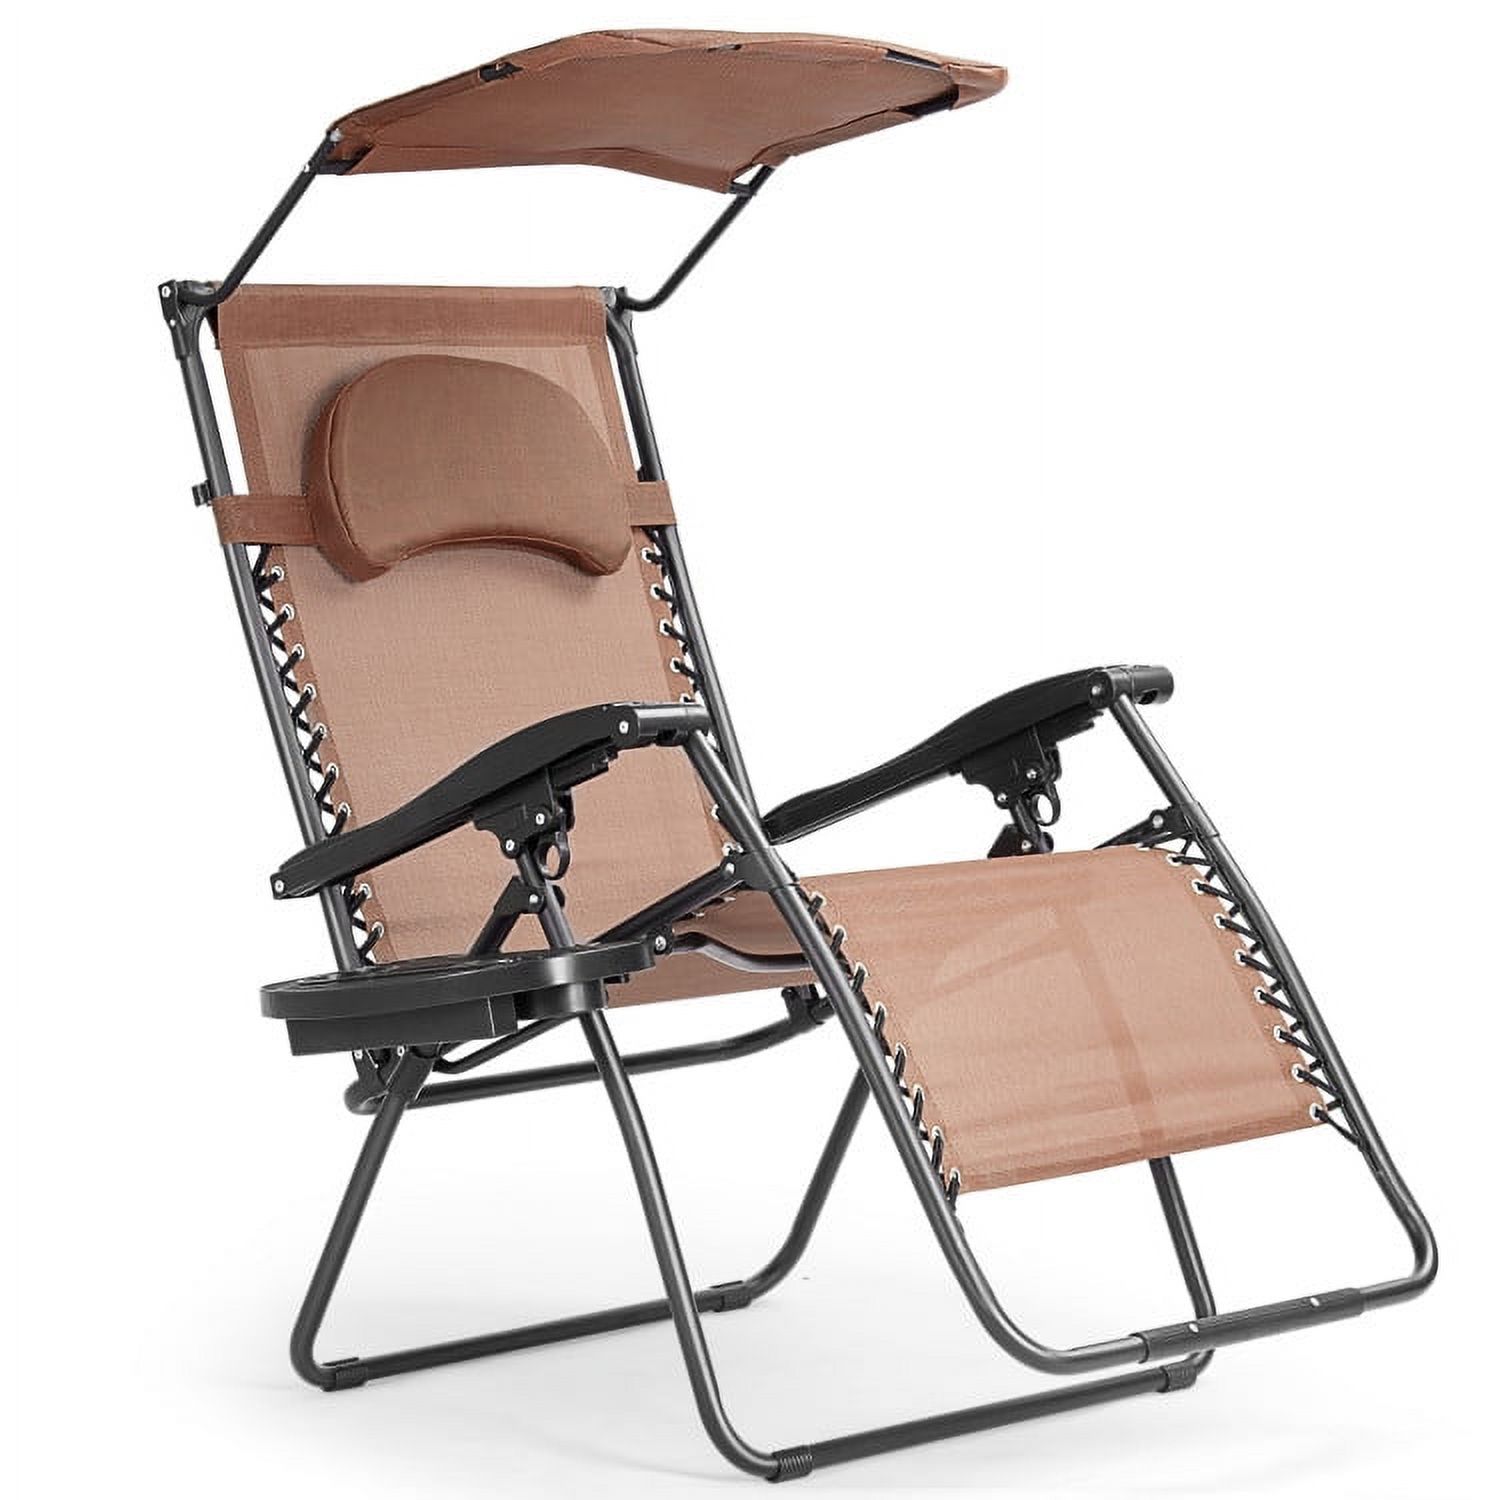 Folding Recliner Lounge Chair with Shade Canopy Cup Holder - image 1 of 6